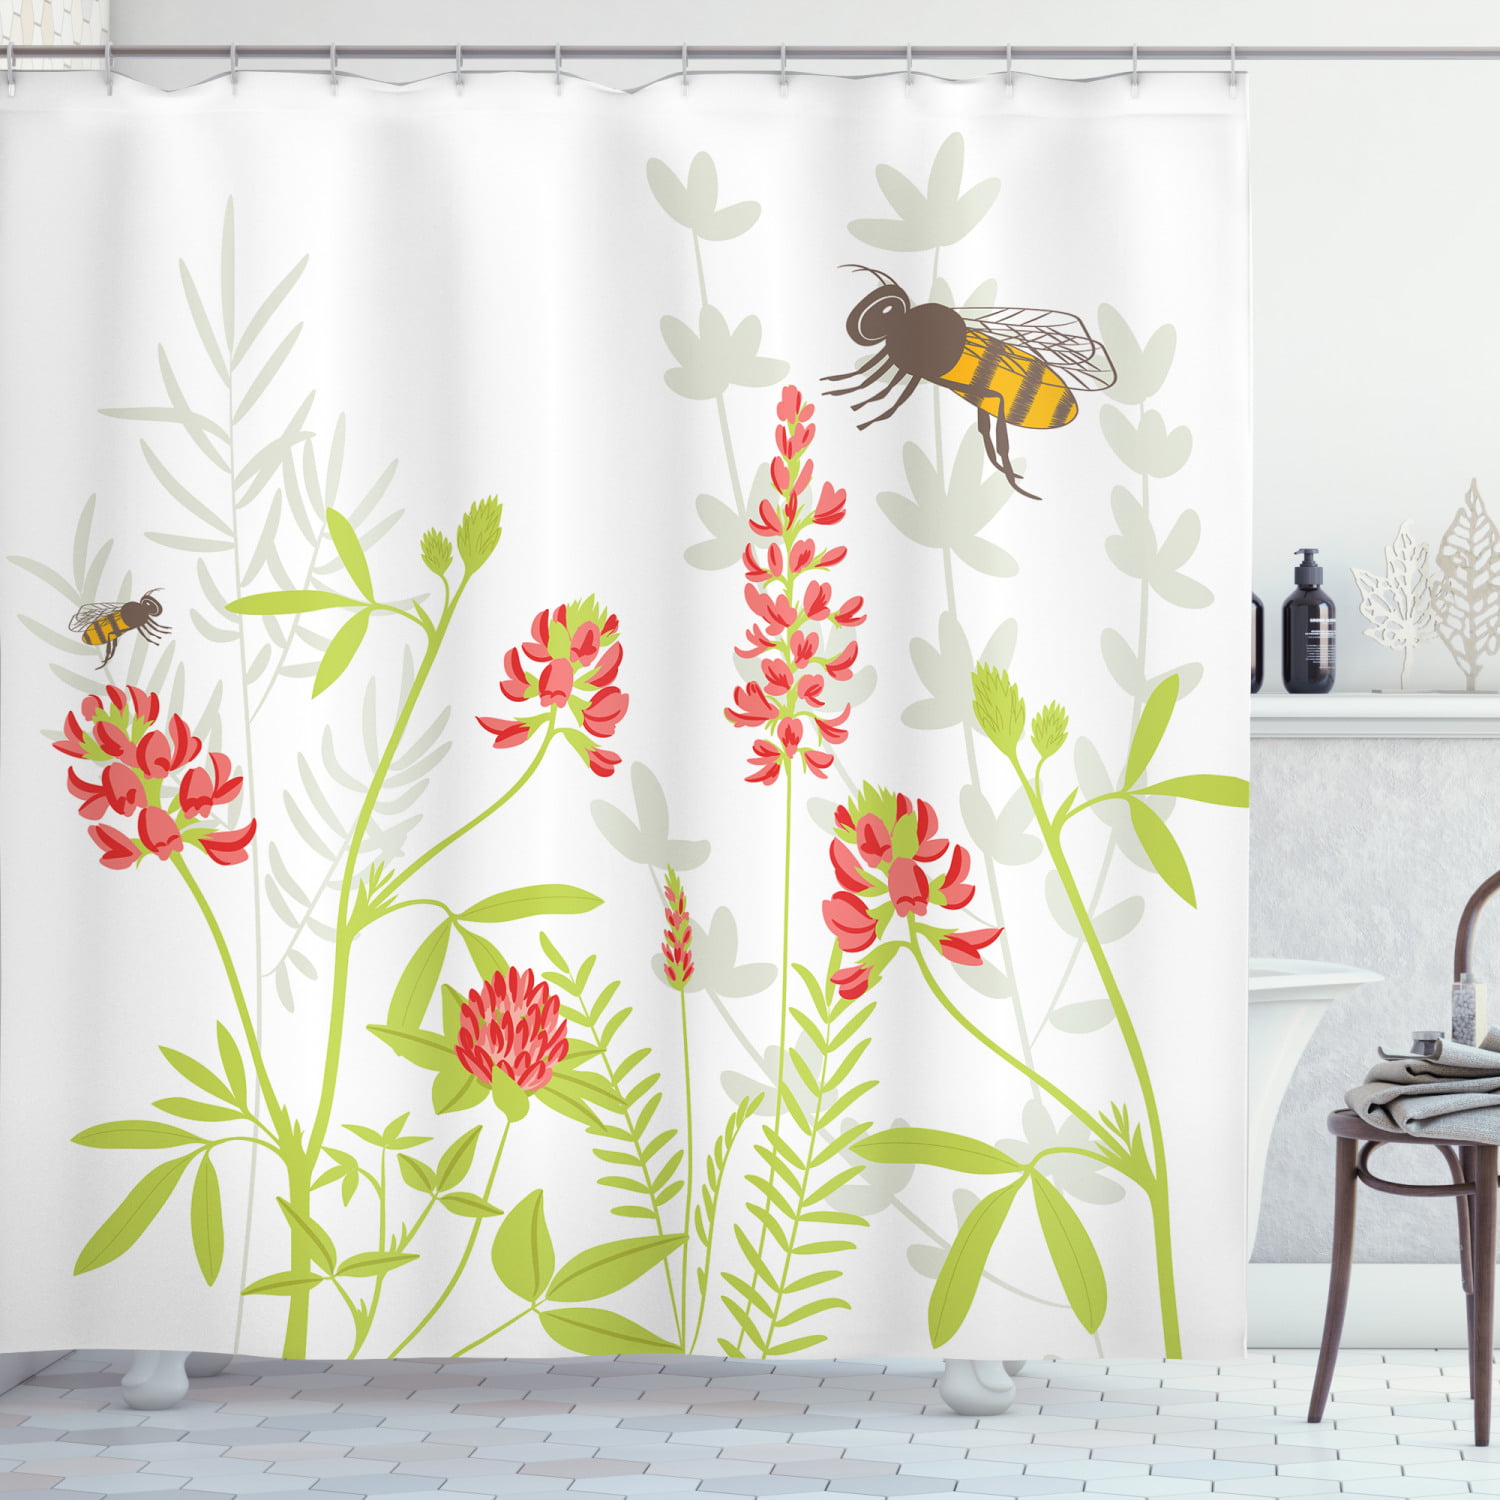 Flowers and Bees Polyester Waterproof Bathroom Fabric Shower Curtain 12 Hook 